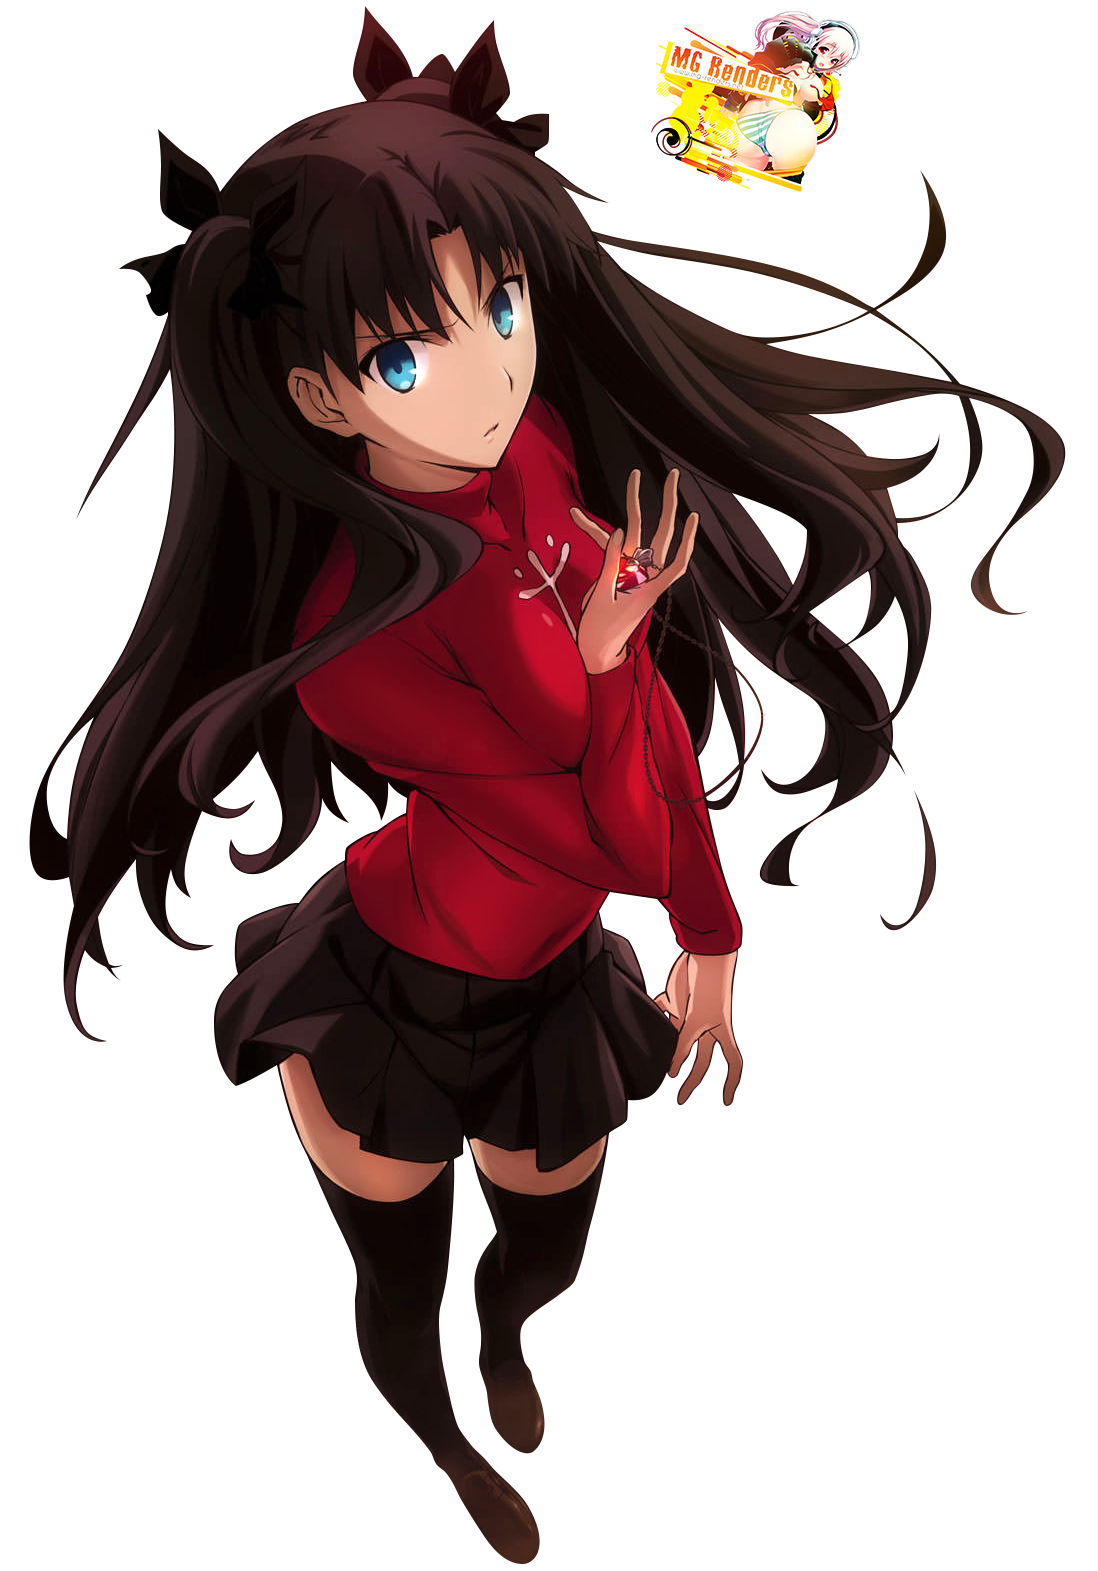 Fate stay night - Tohsaka Rin Render 9 - Anime - PNG Image without